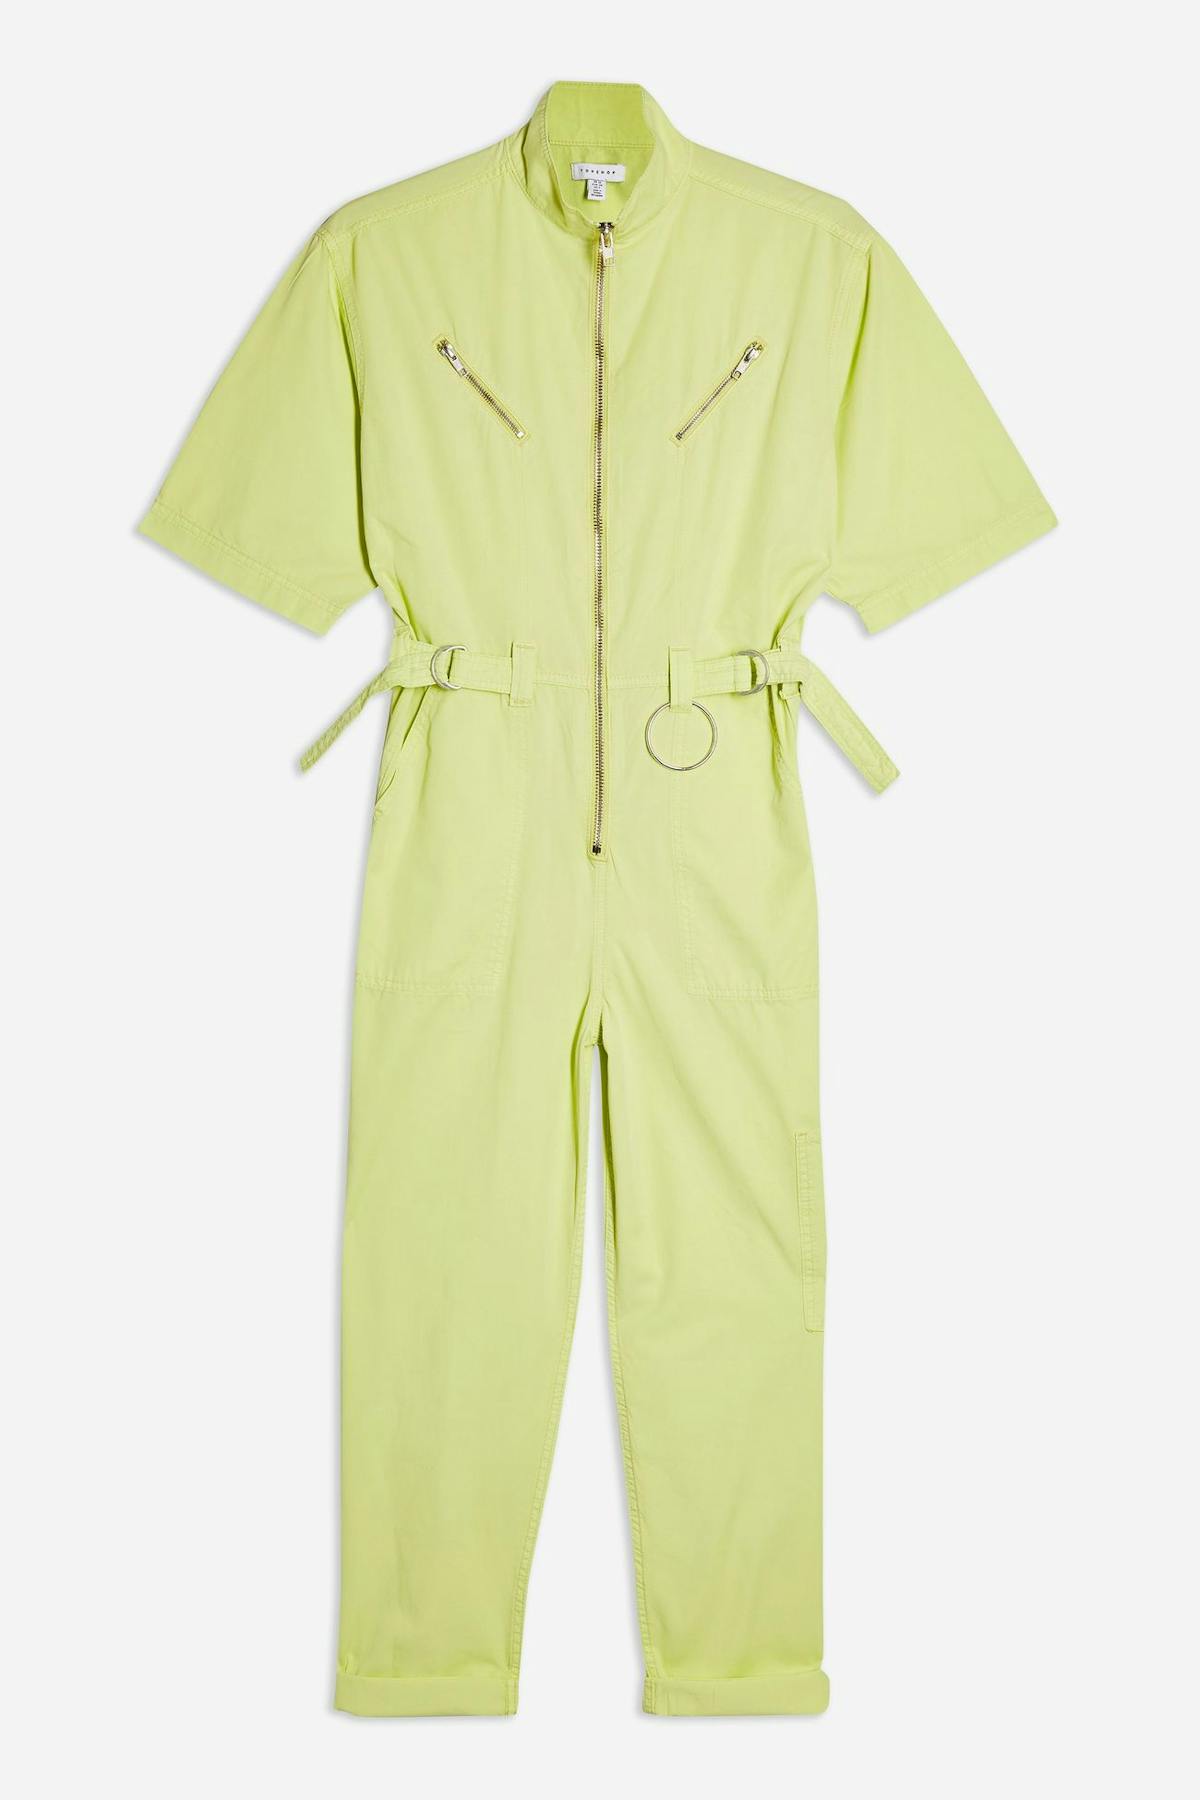 Lime green is the colour you'll want in your wardrobe for summer